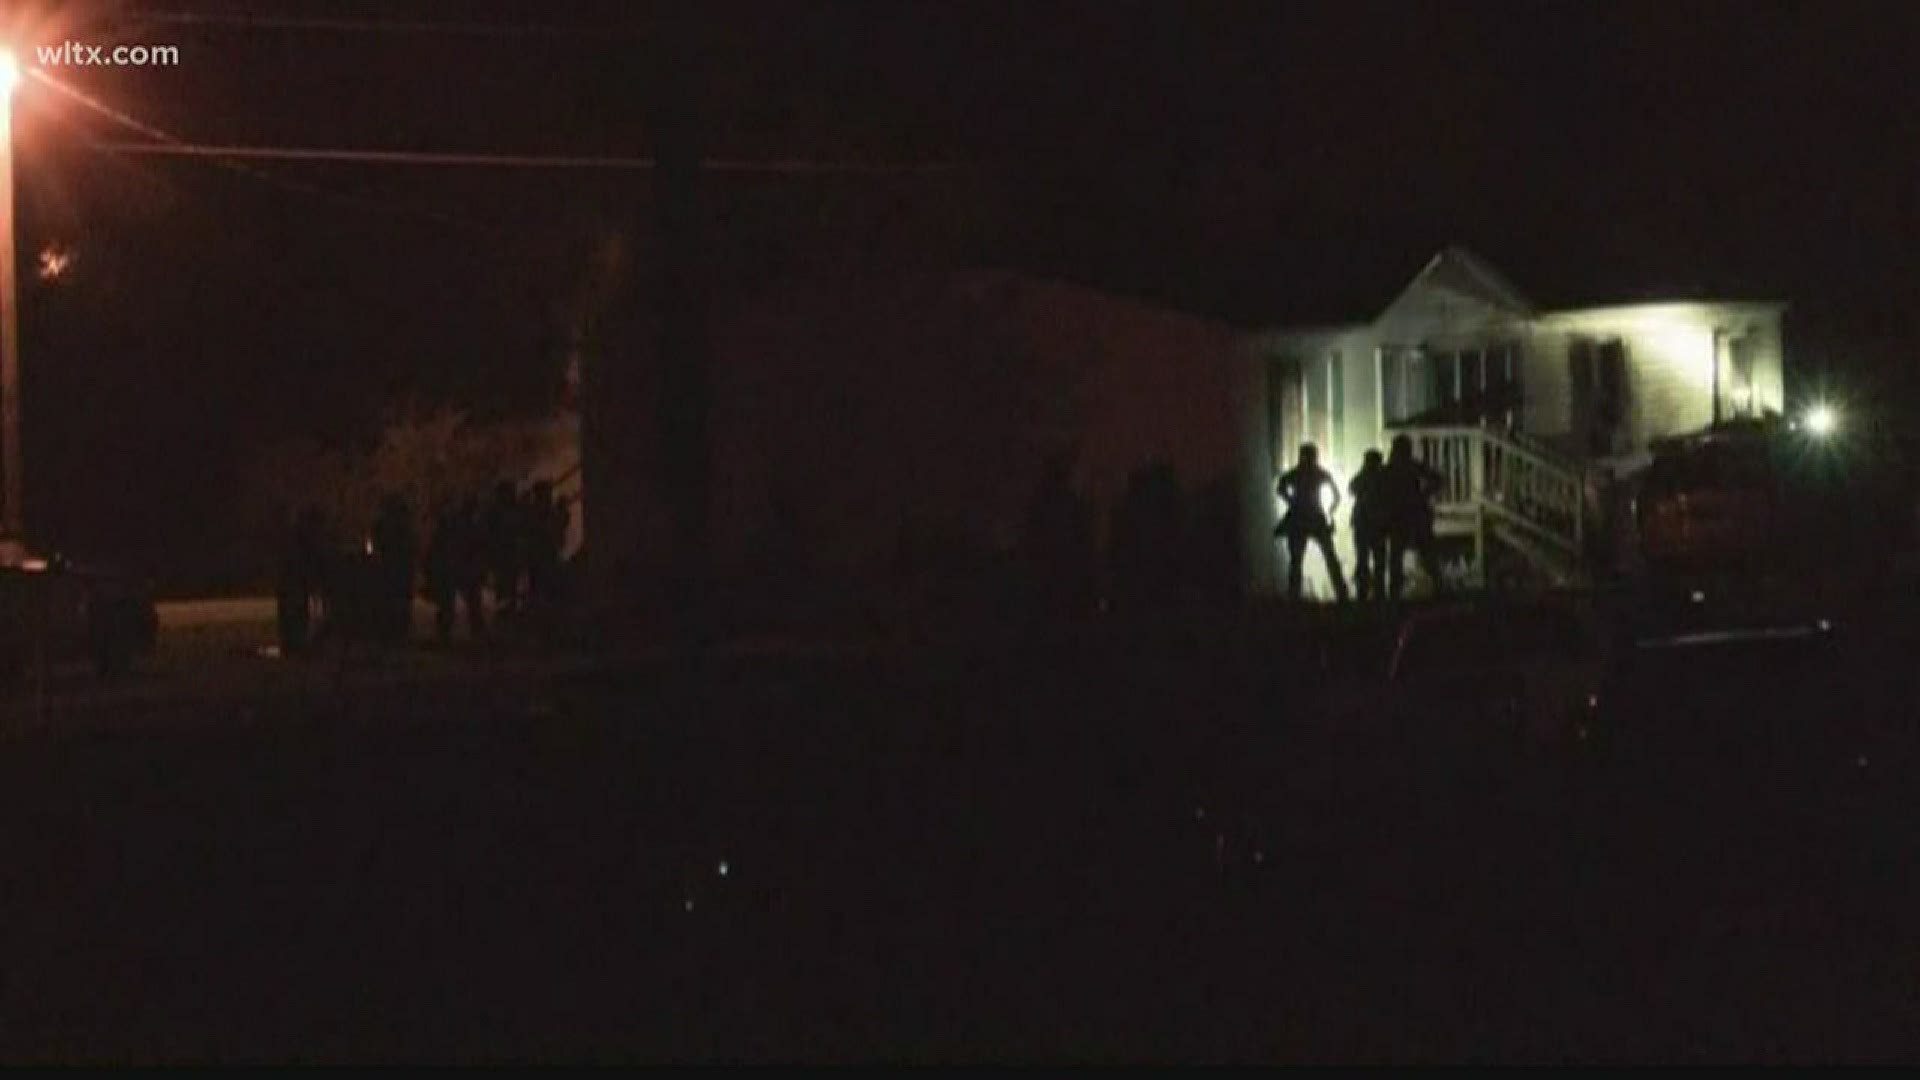 Tear gas used to remove suspect barricaded in Eastover home, deputies